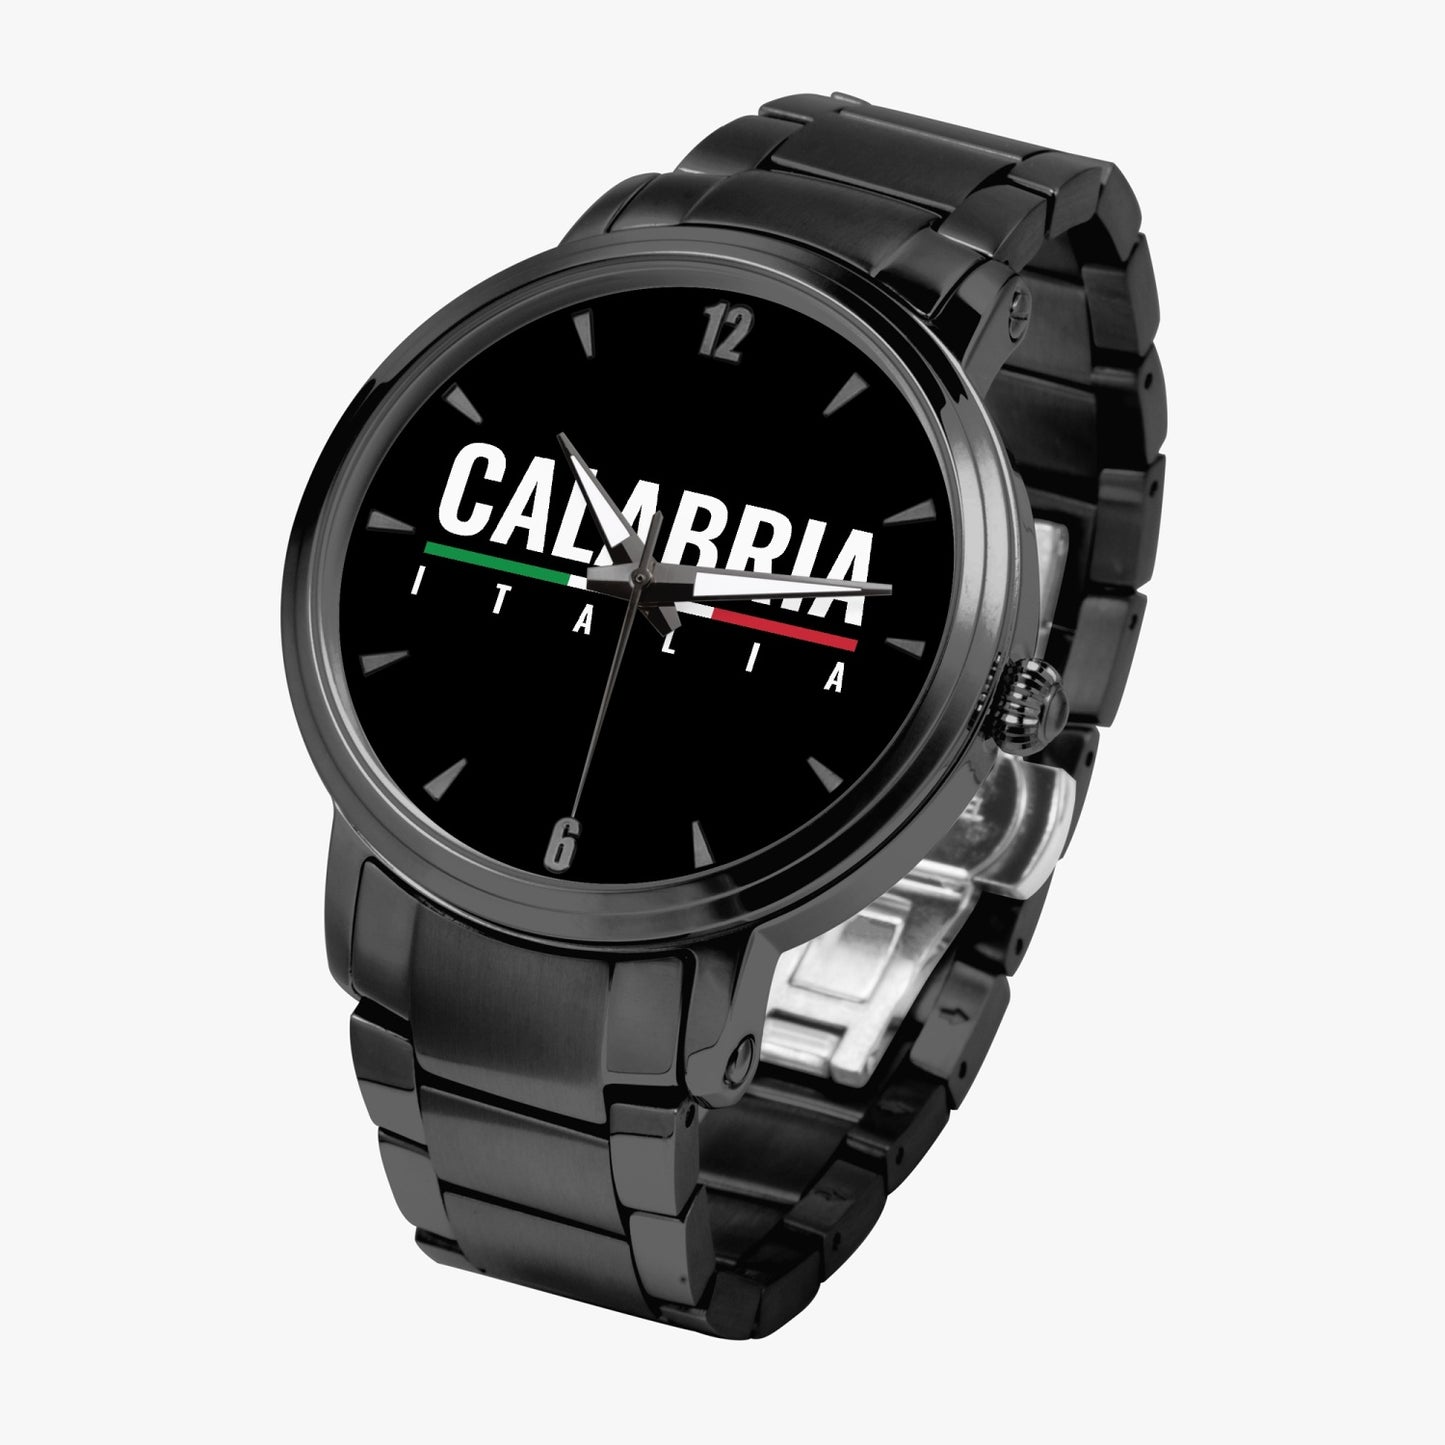 Calabria Italia Automatic Movement Watch - Premium Stainless Steel